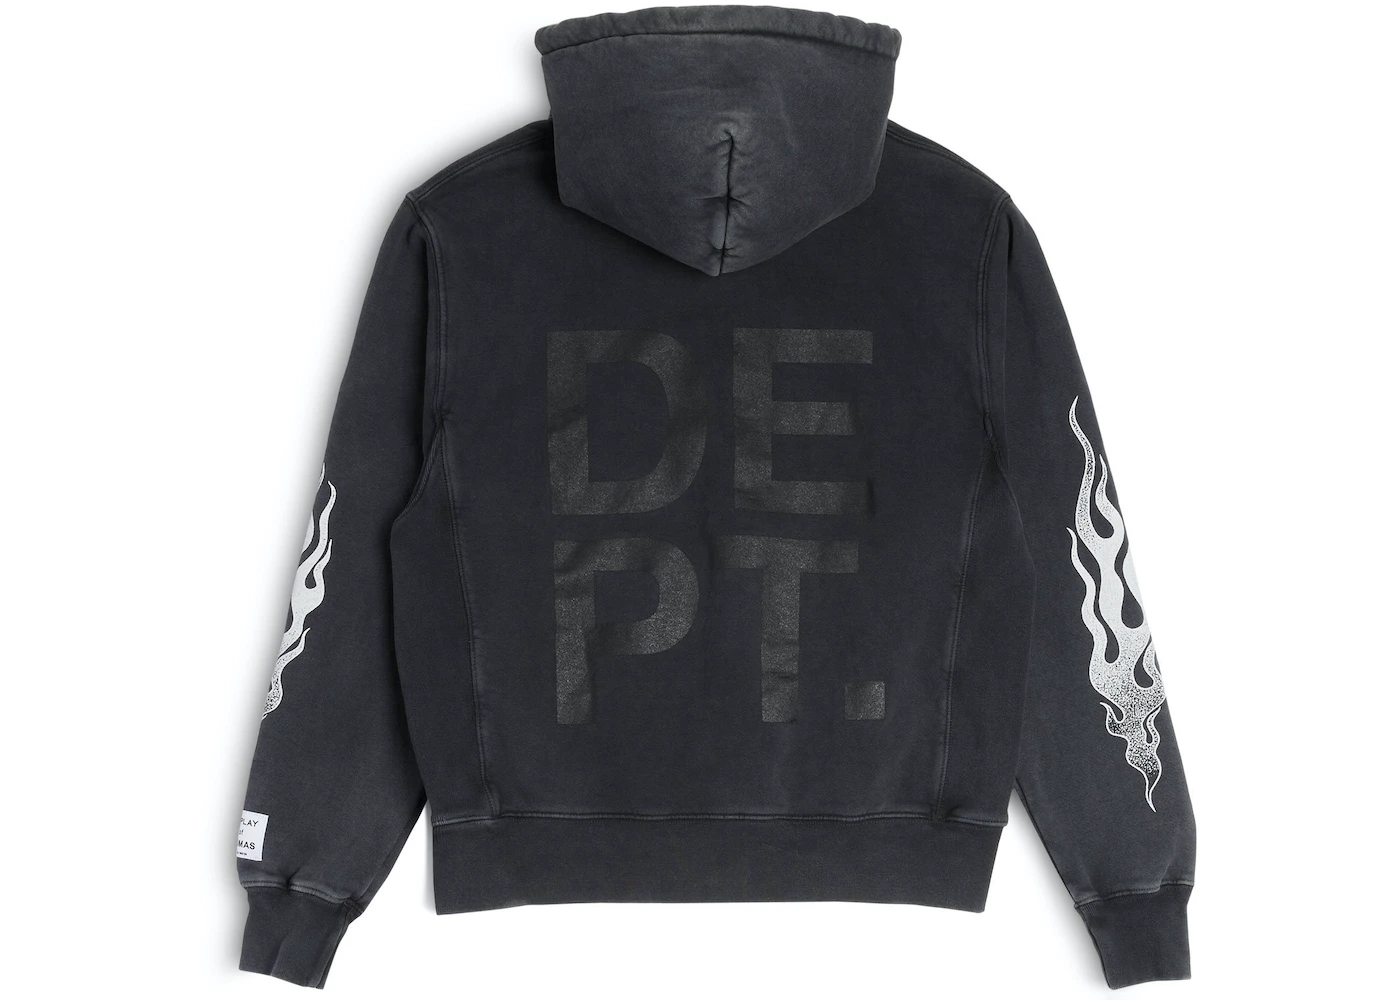 Gallery Dept Flame Hoodie: Igniting Street-Style Rebellion